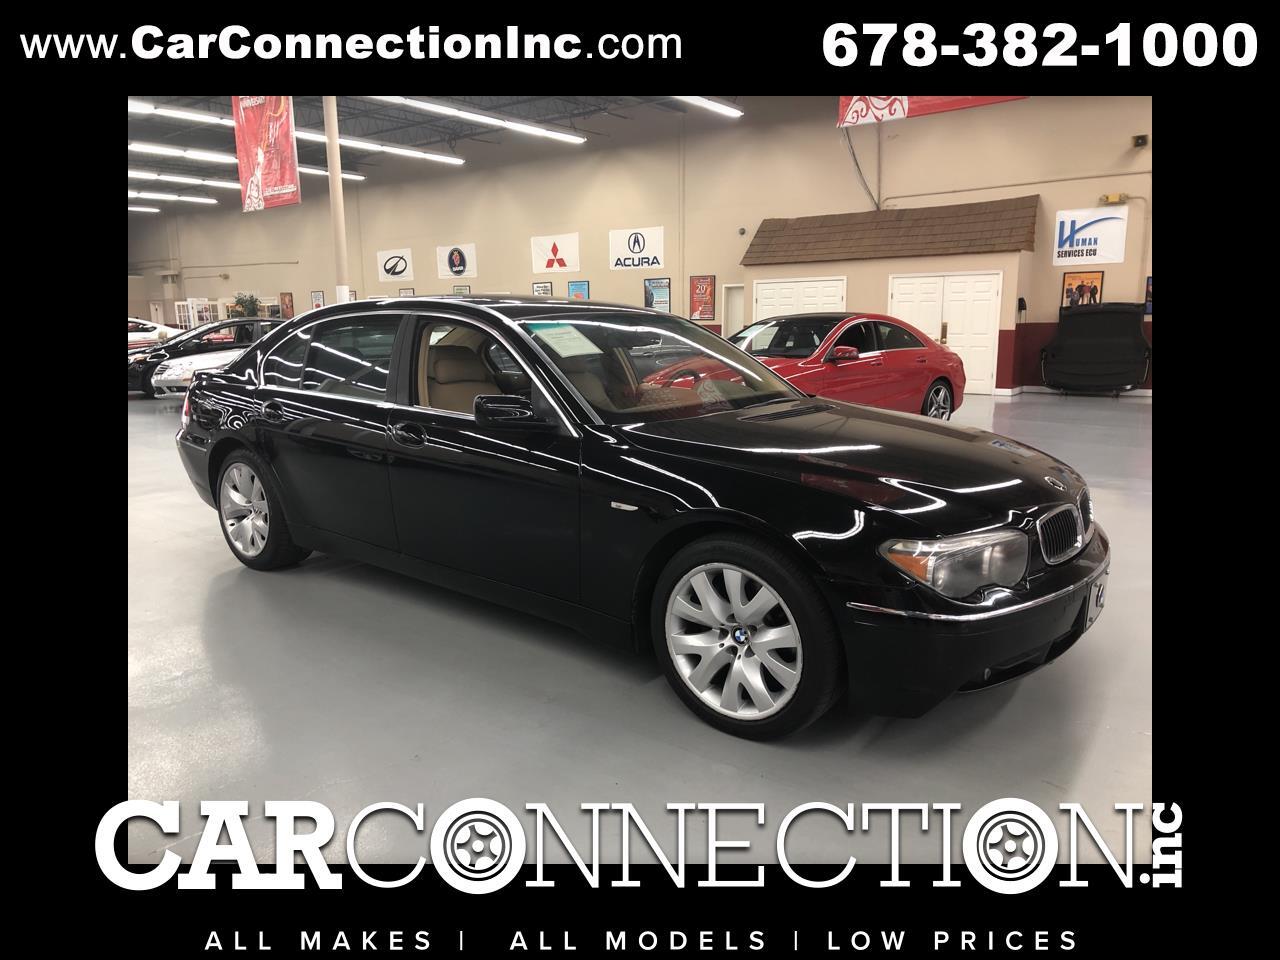 Used 2003 BMW 7 Series 745Li for Sale in Tucker GA 30084 Car Connection ...